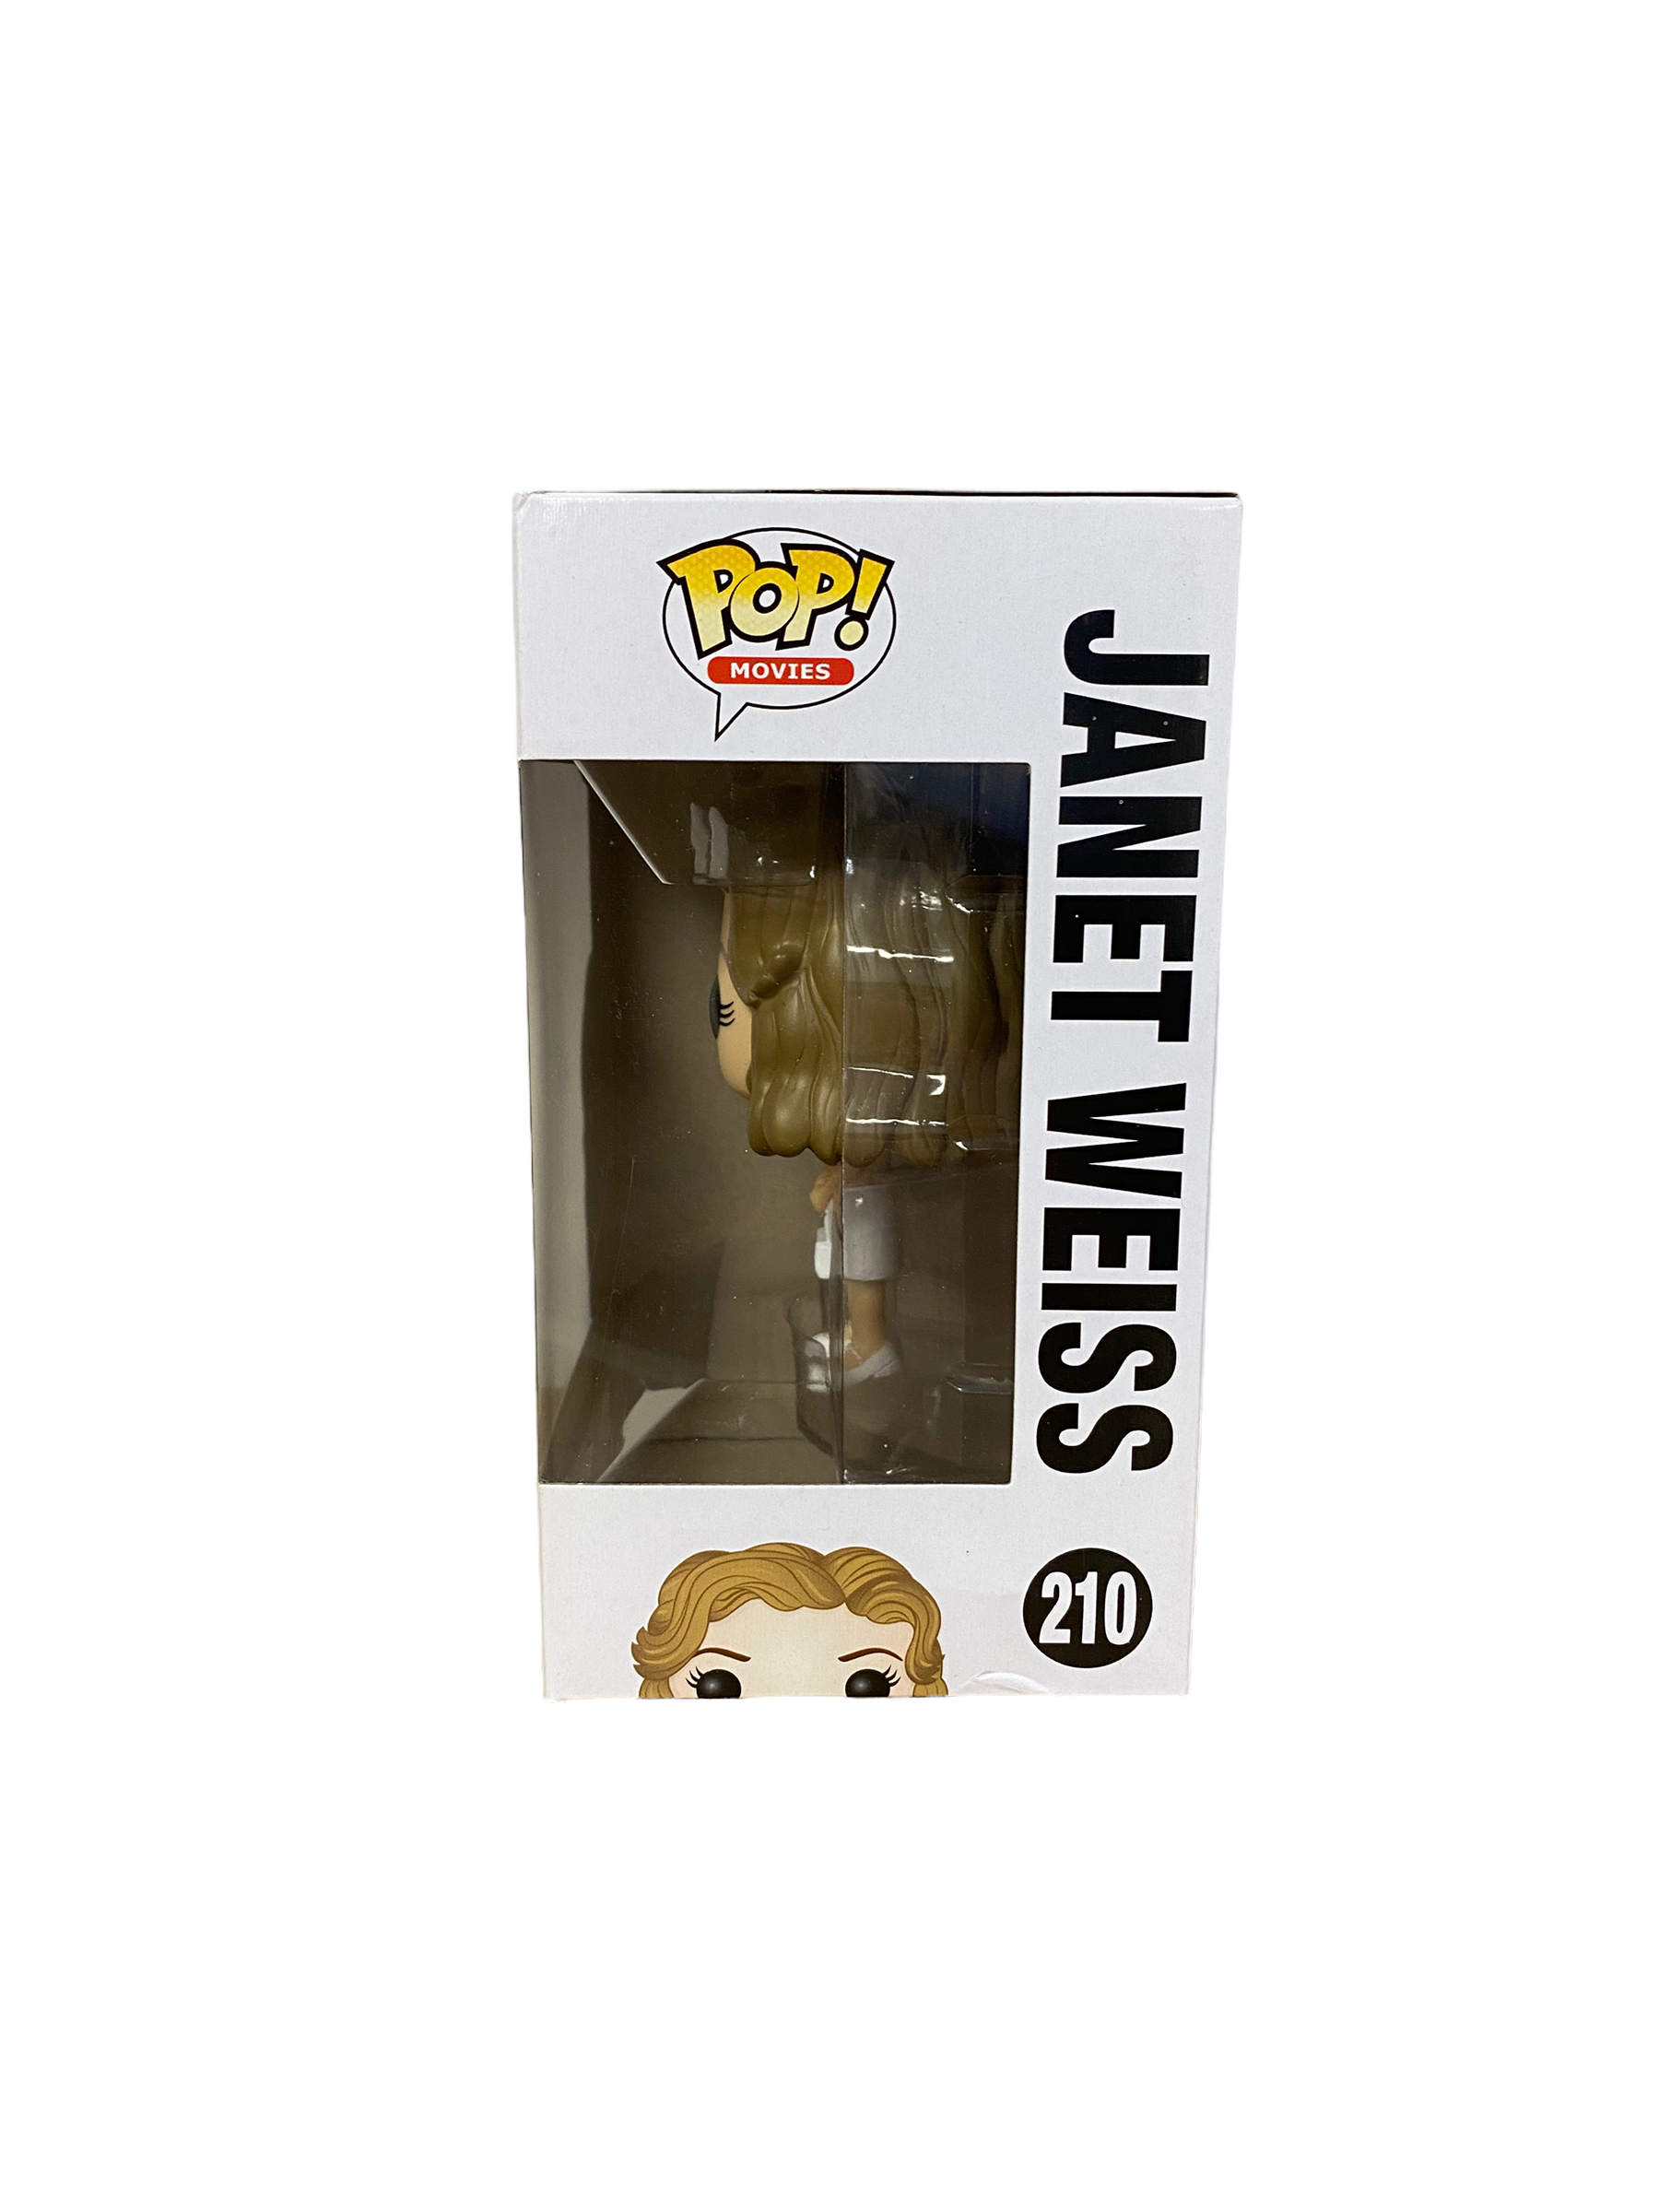 Janet Weiss #210 Funko Pop! - The Rocky Horror Show - 2015 Pop! - Condition 8/10